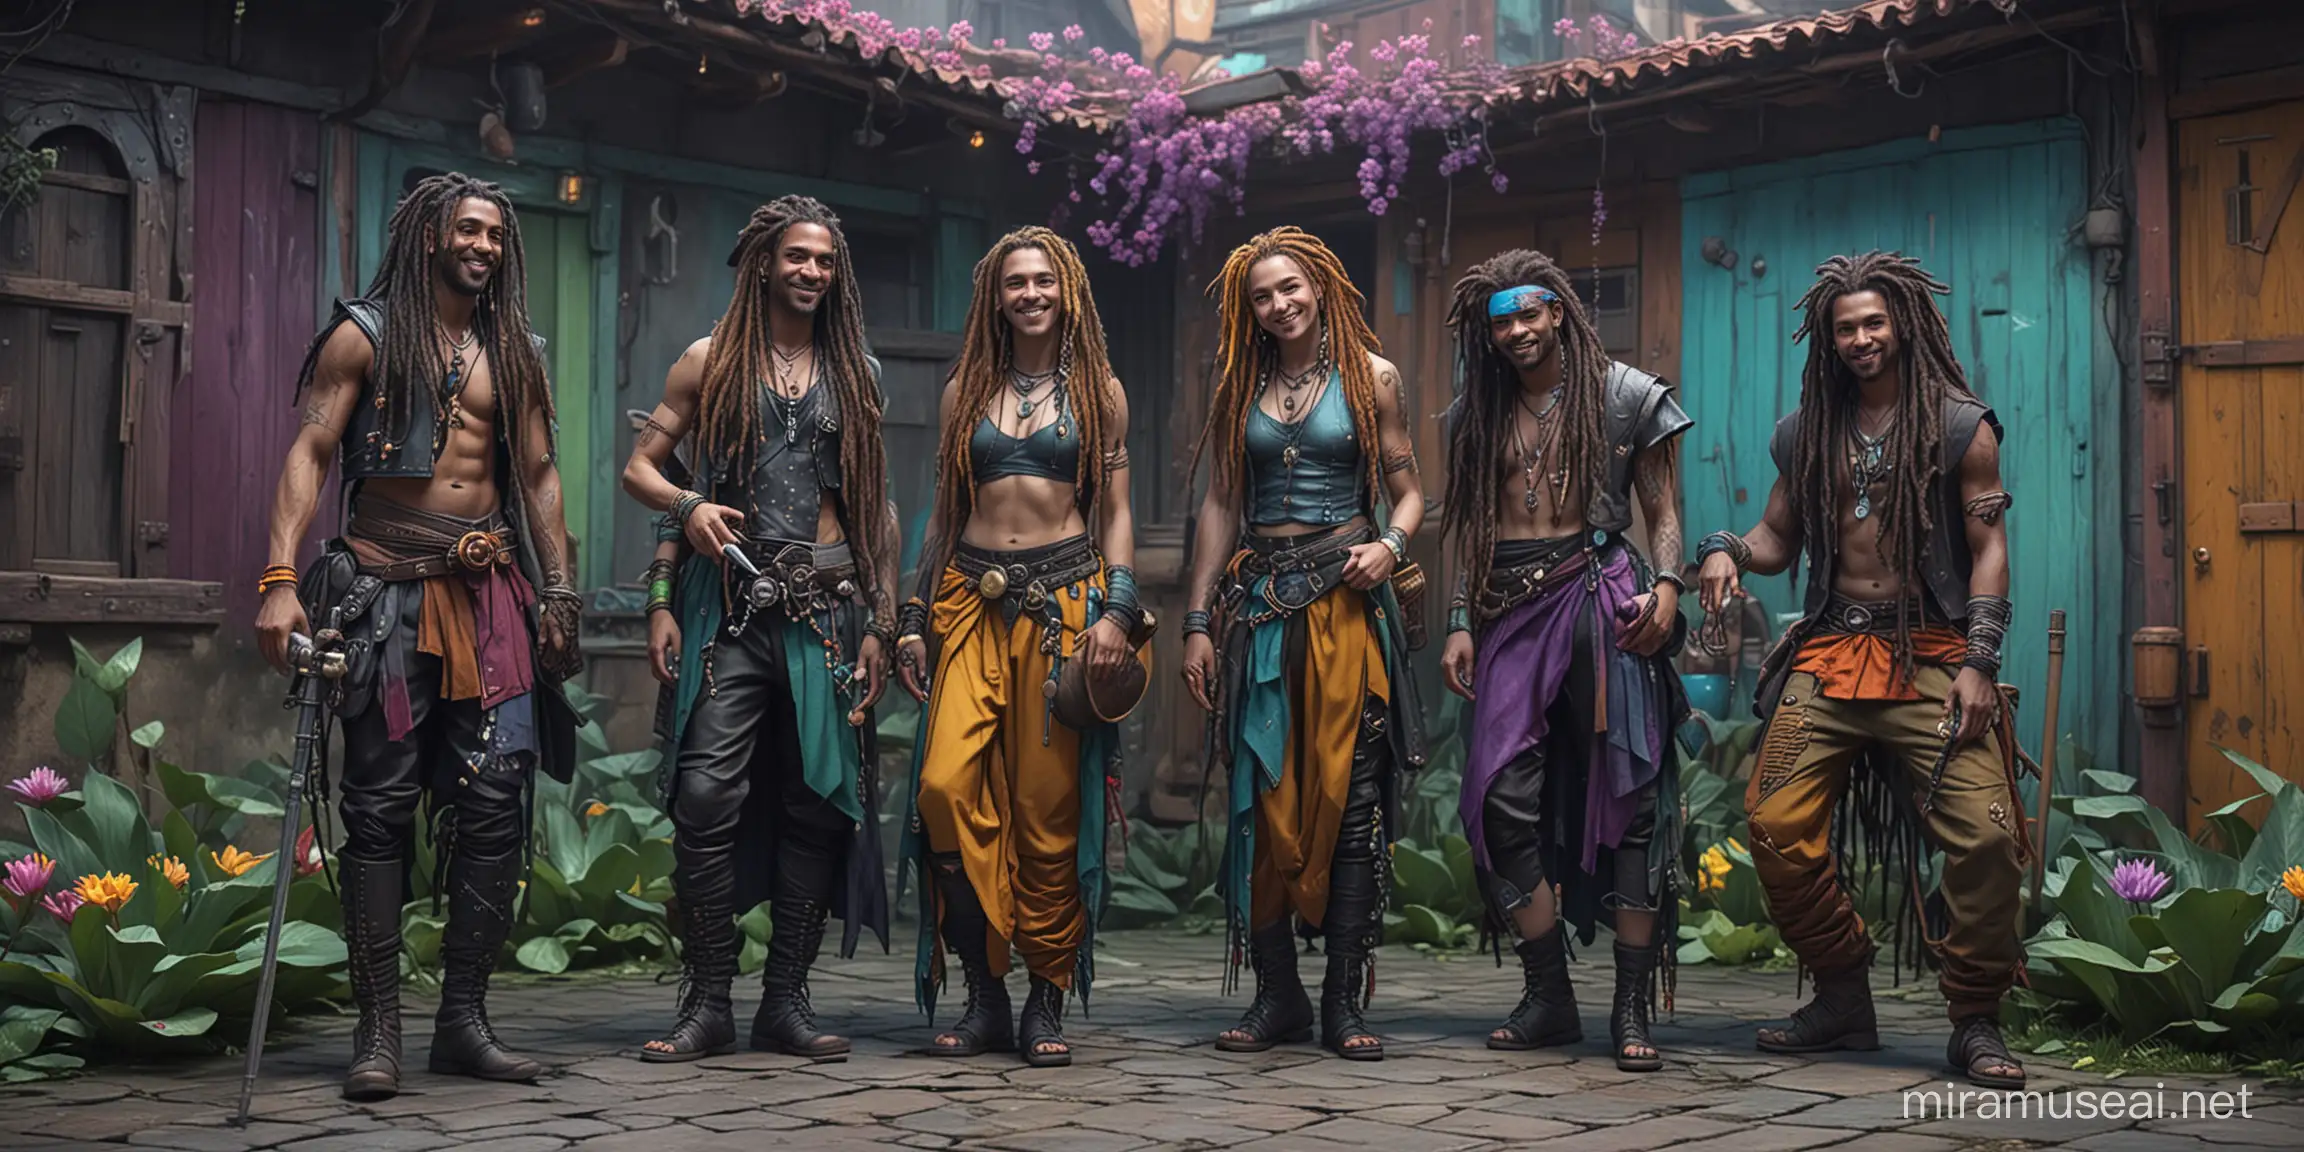 five females and males smiling cyber- punks in colored style, cyber-punks with long dreadlocks, crooked men who carry around a bag and cane, medival colored clothes, different activities and poses, they play musical instruments in different poses, purple, turquoise, yellow, green, decorated with lotus flowers and water lilies, music instruments like drum sets and guitars and saxophones are lying left and right on the floor, dark colored futuristic village houses on background, asymmetric background psychedelic in multiple colors wearing of heavily, background blurred, hyper-realistic, photo-realistic